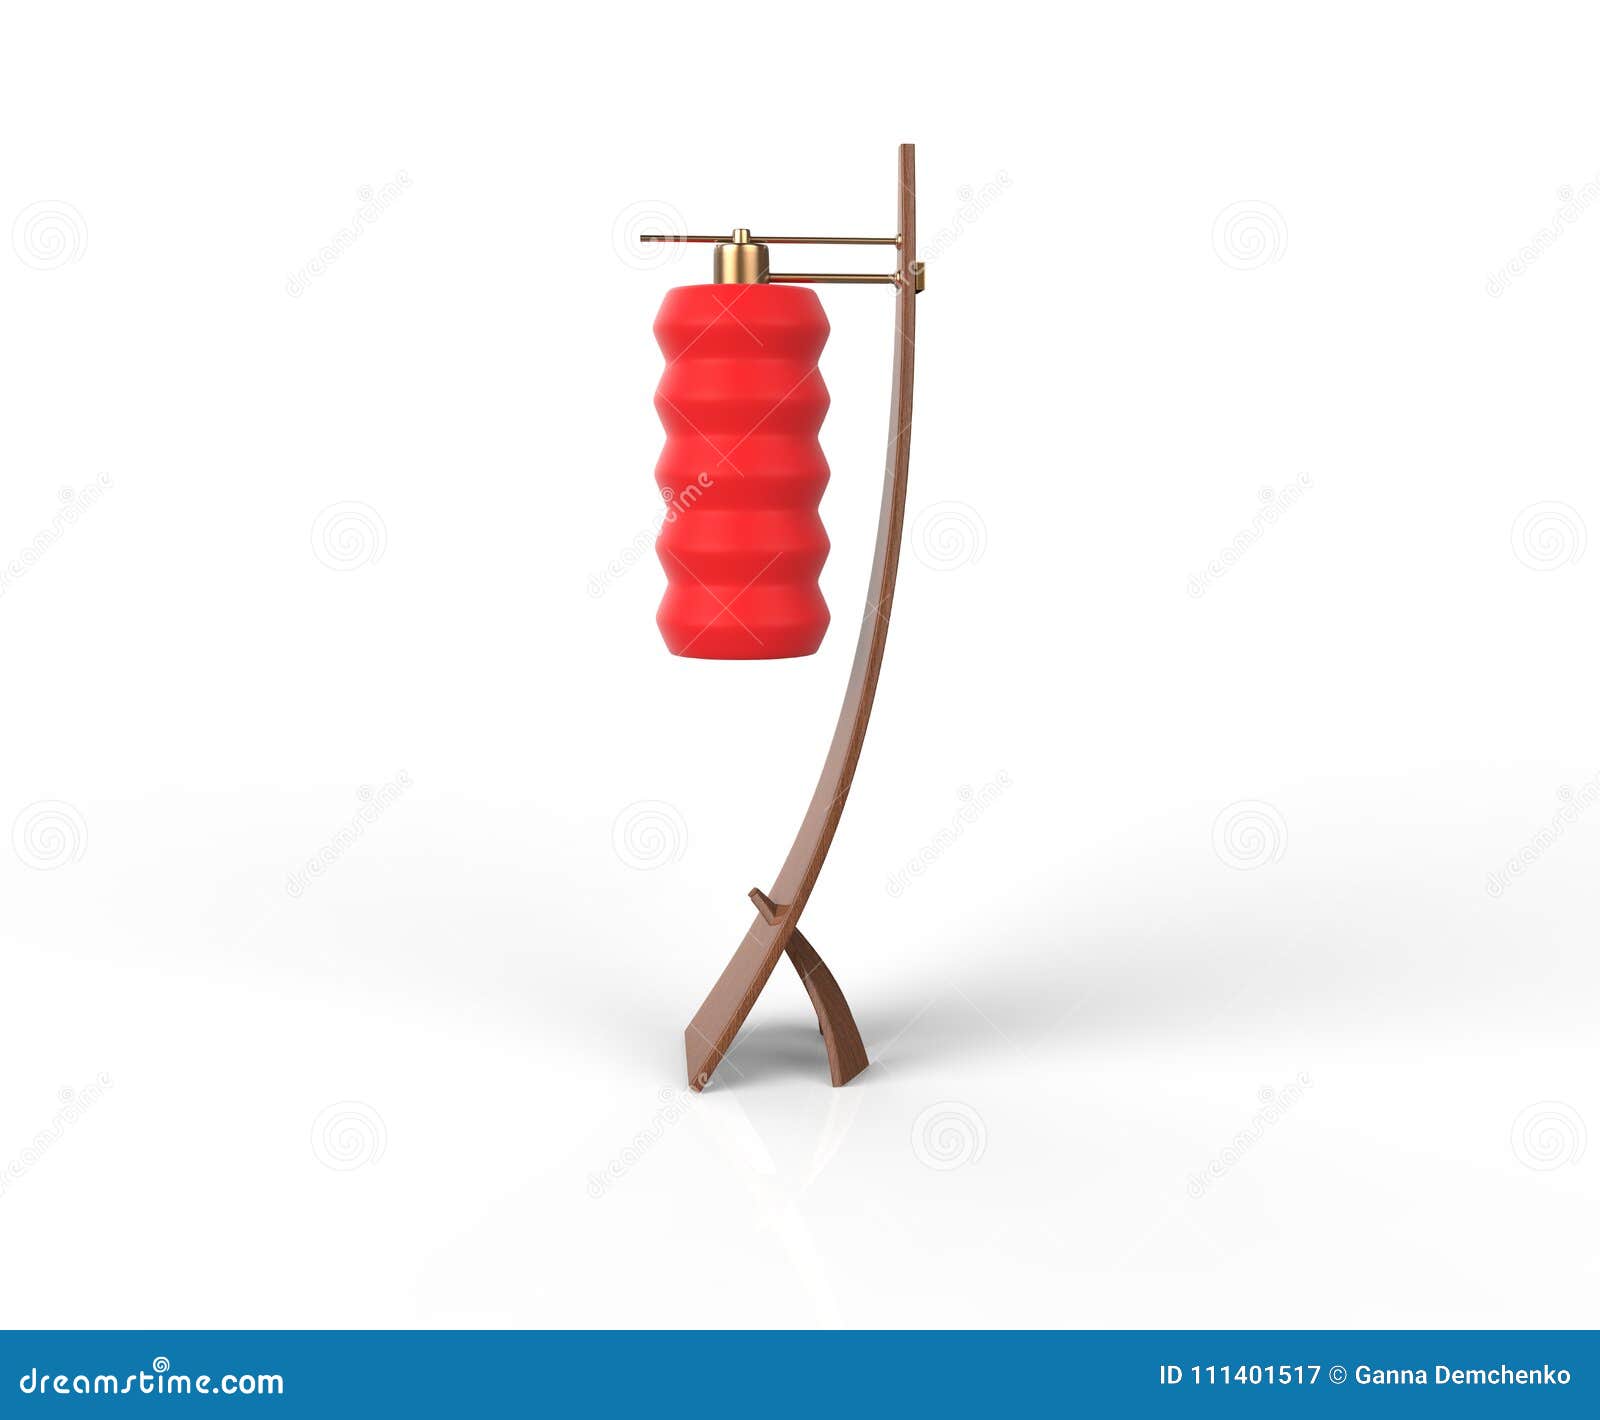 Red Floor Lamp In Japanese Style Isolated On White Background